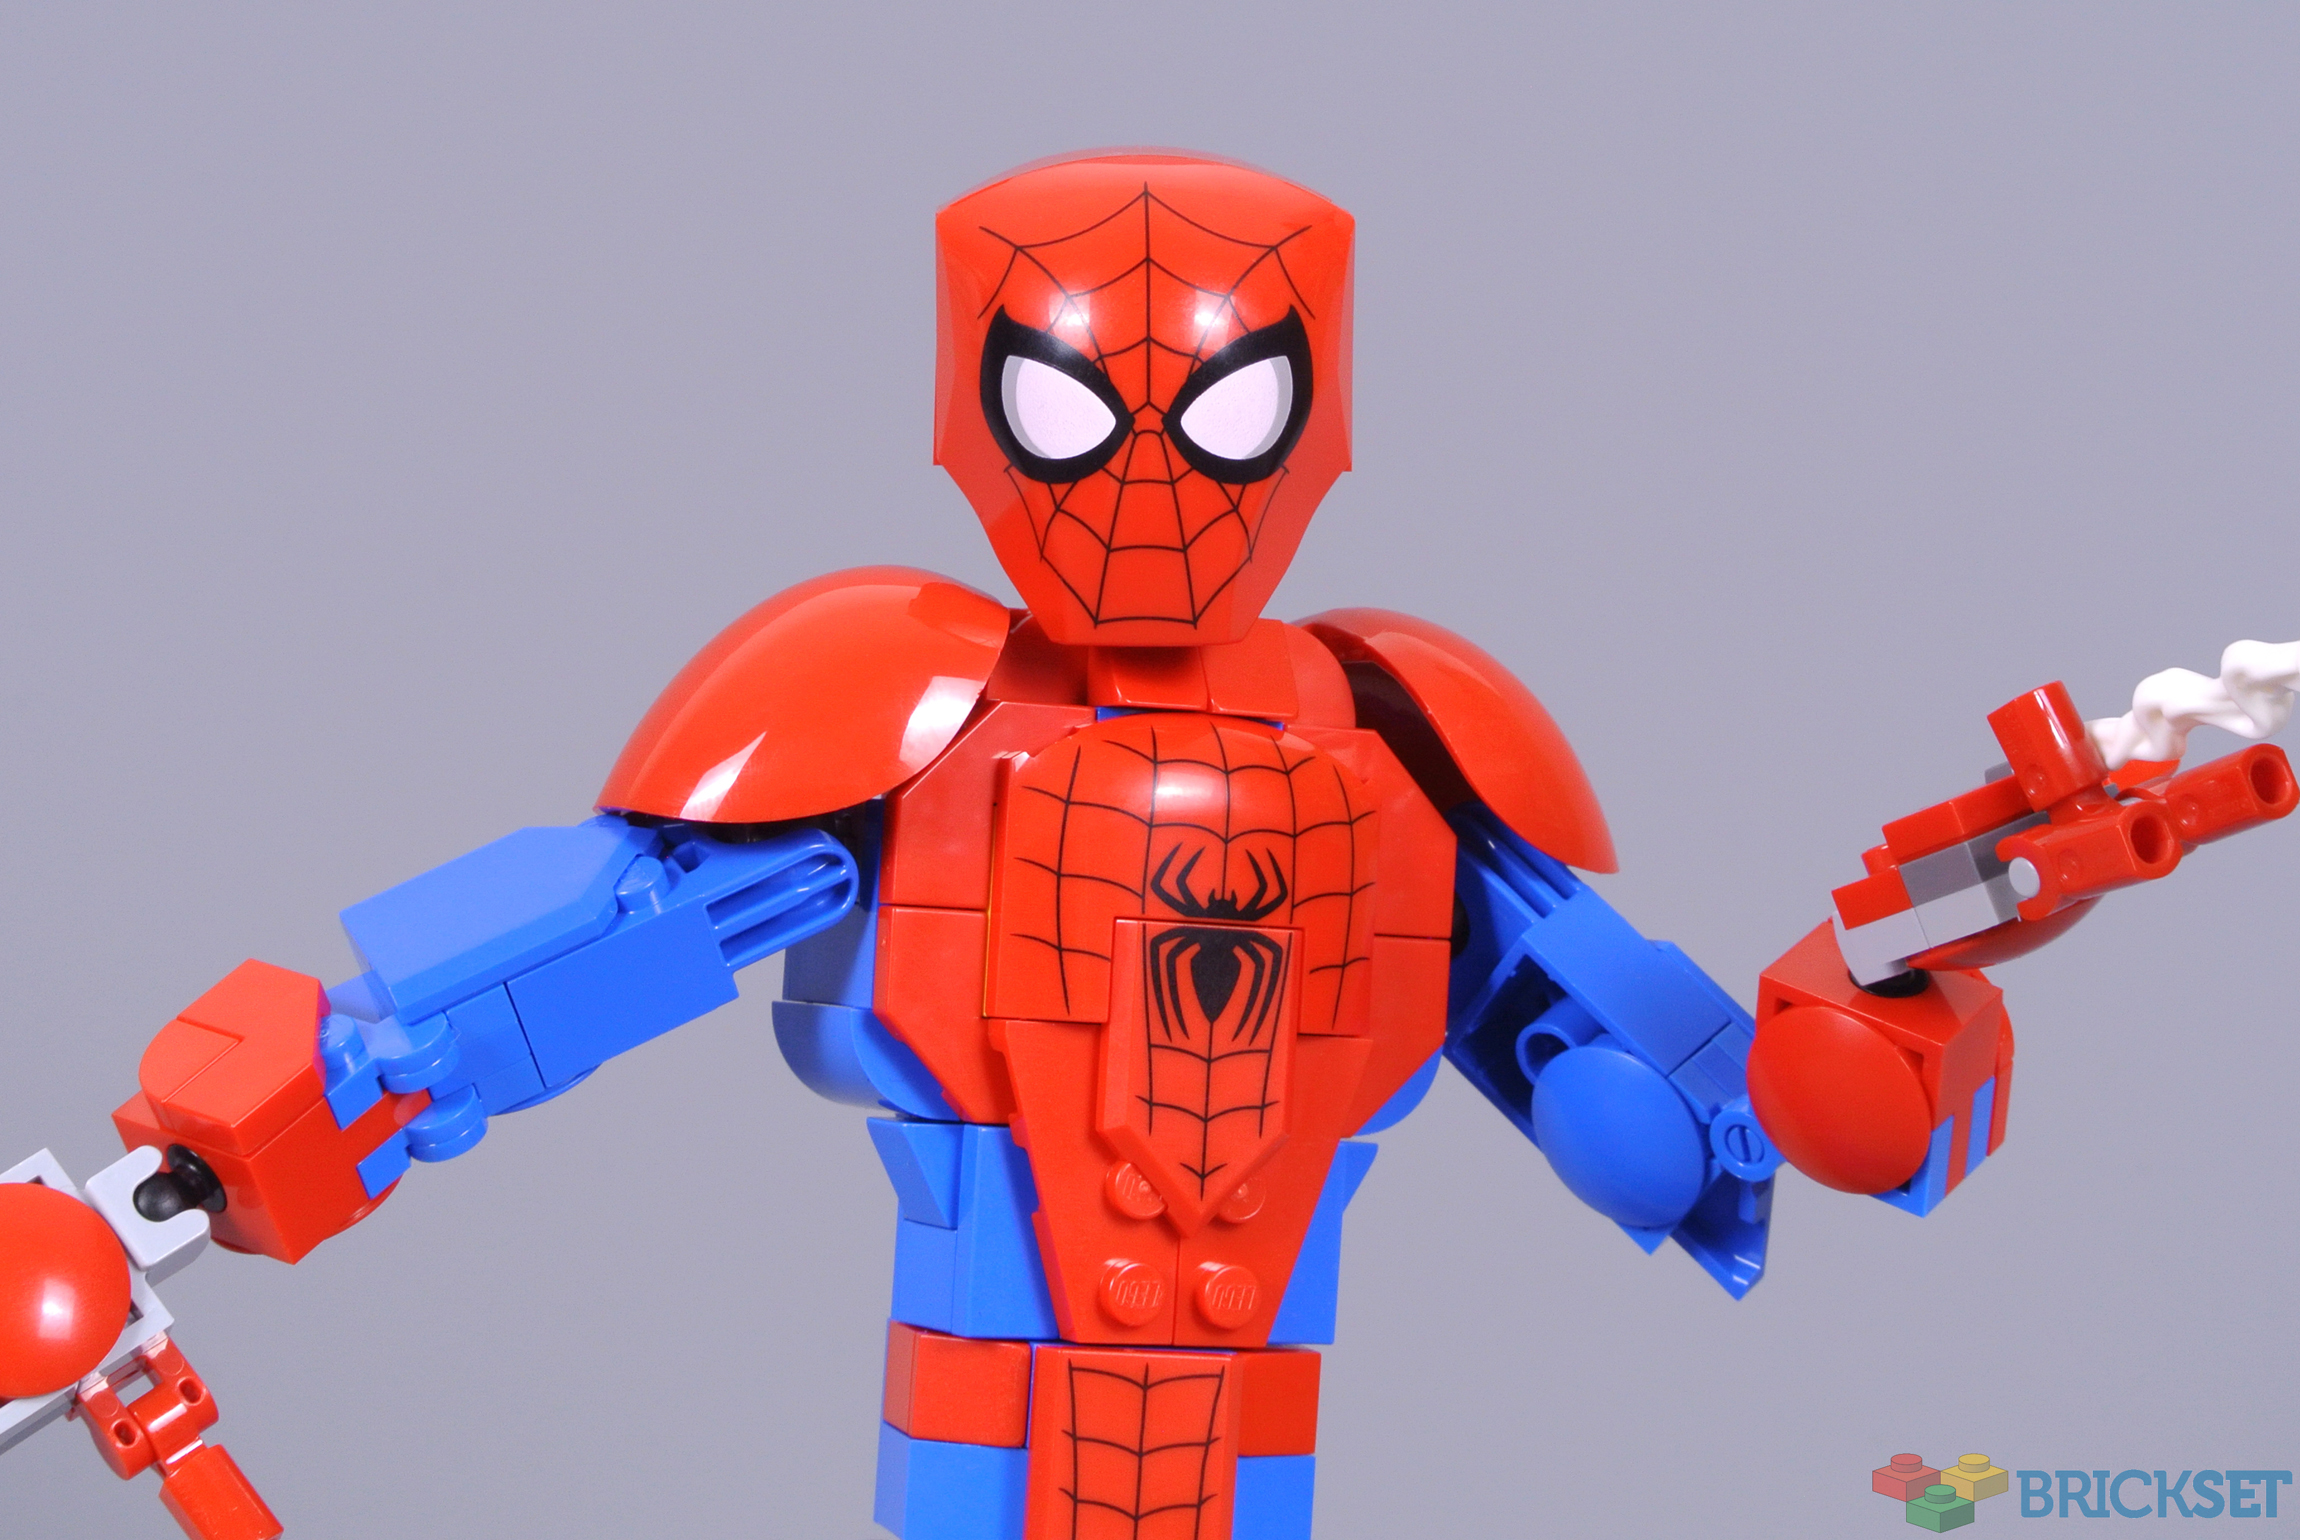 LEGO 76226 Spider-Man Figure review